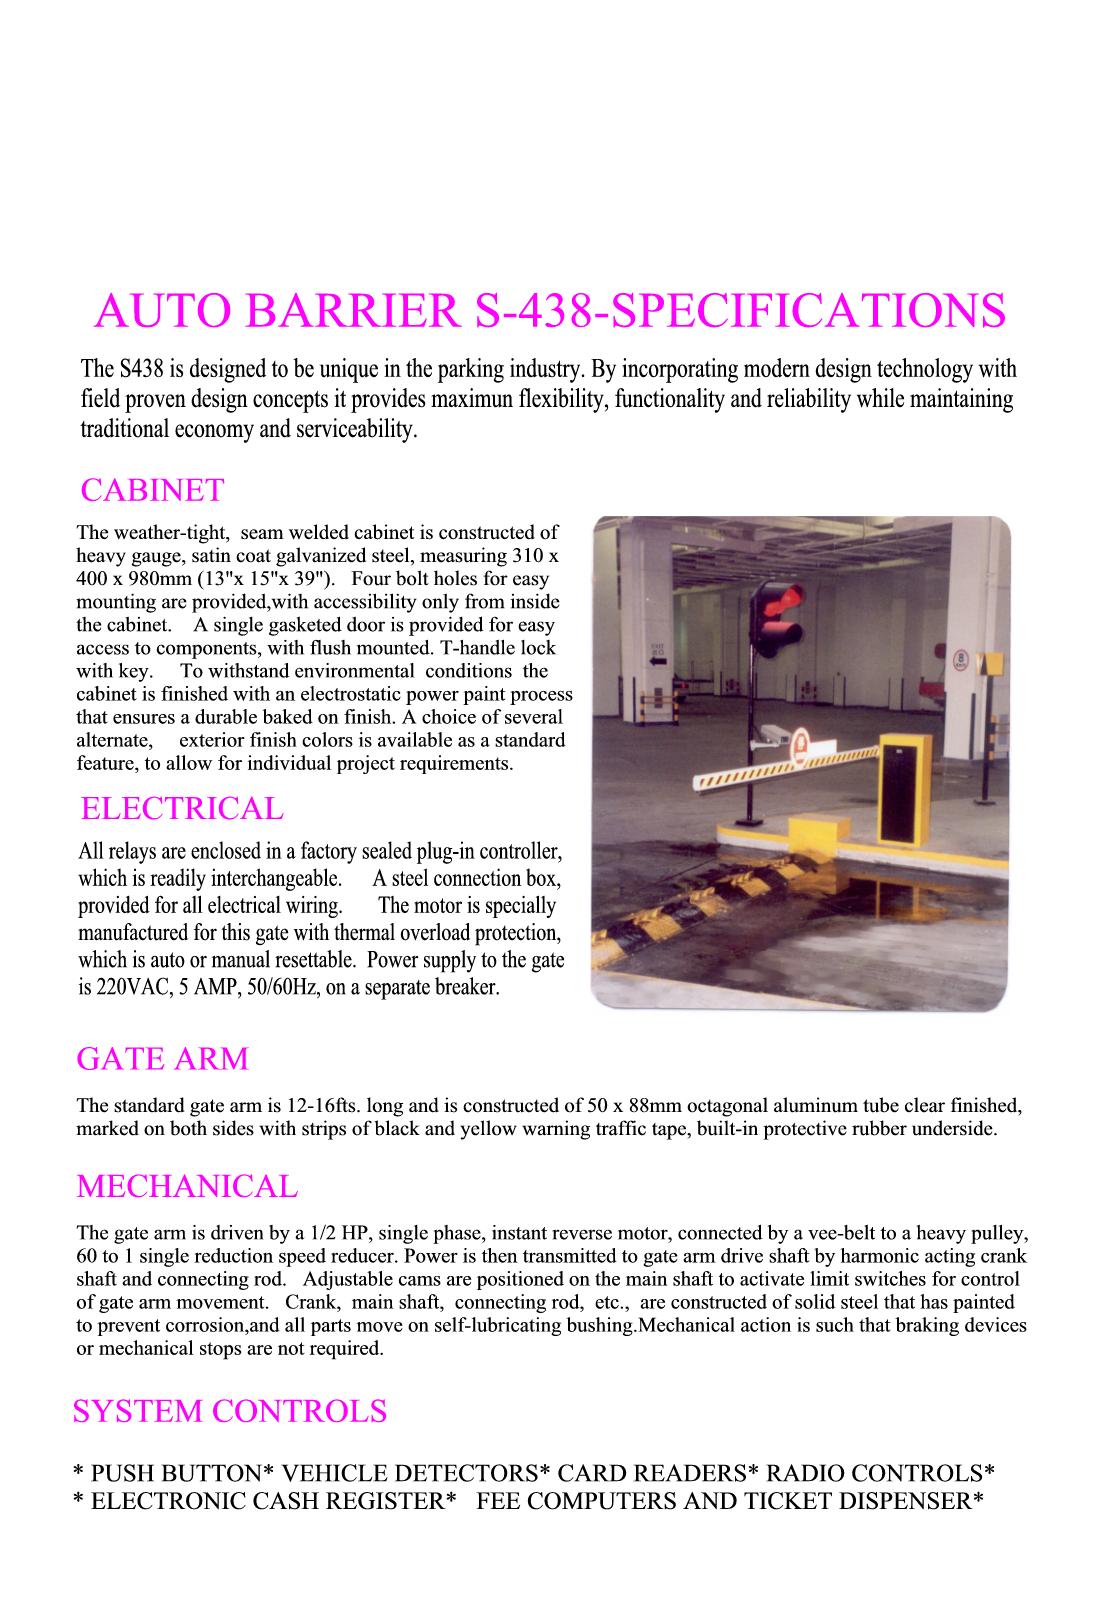 Triangle Barrier T-3 Specifications